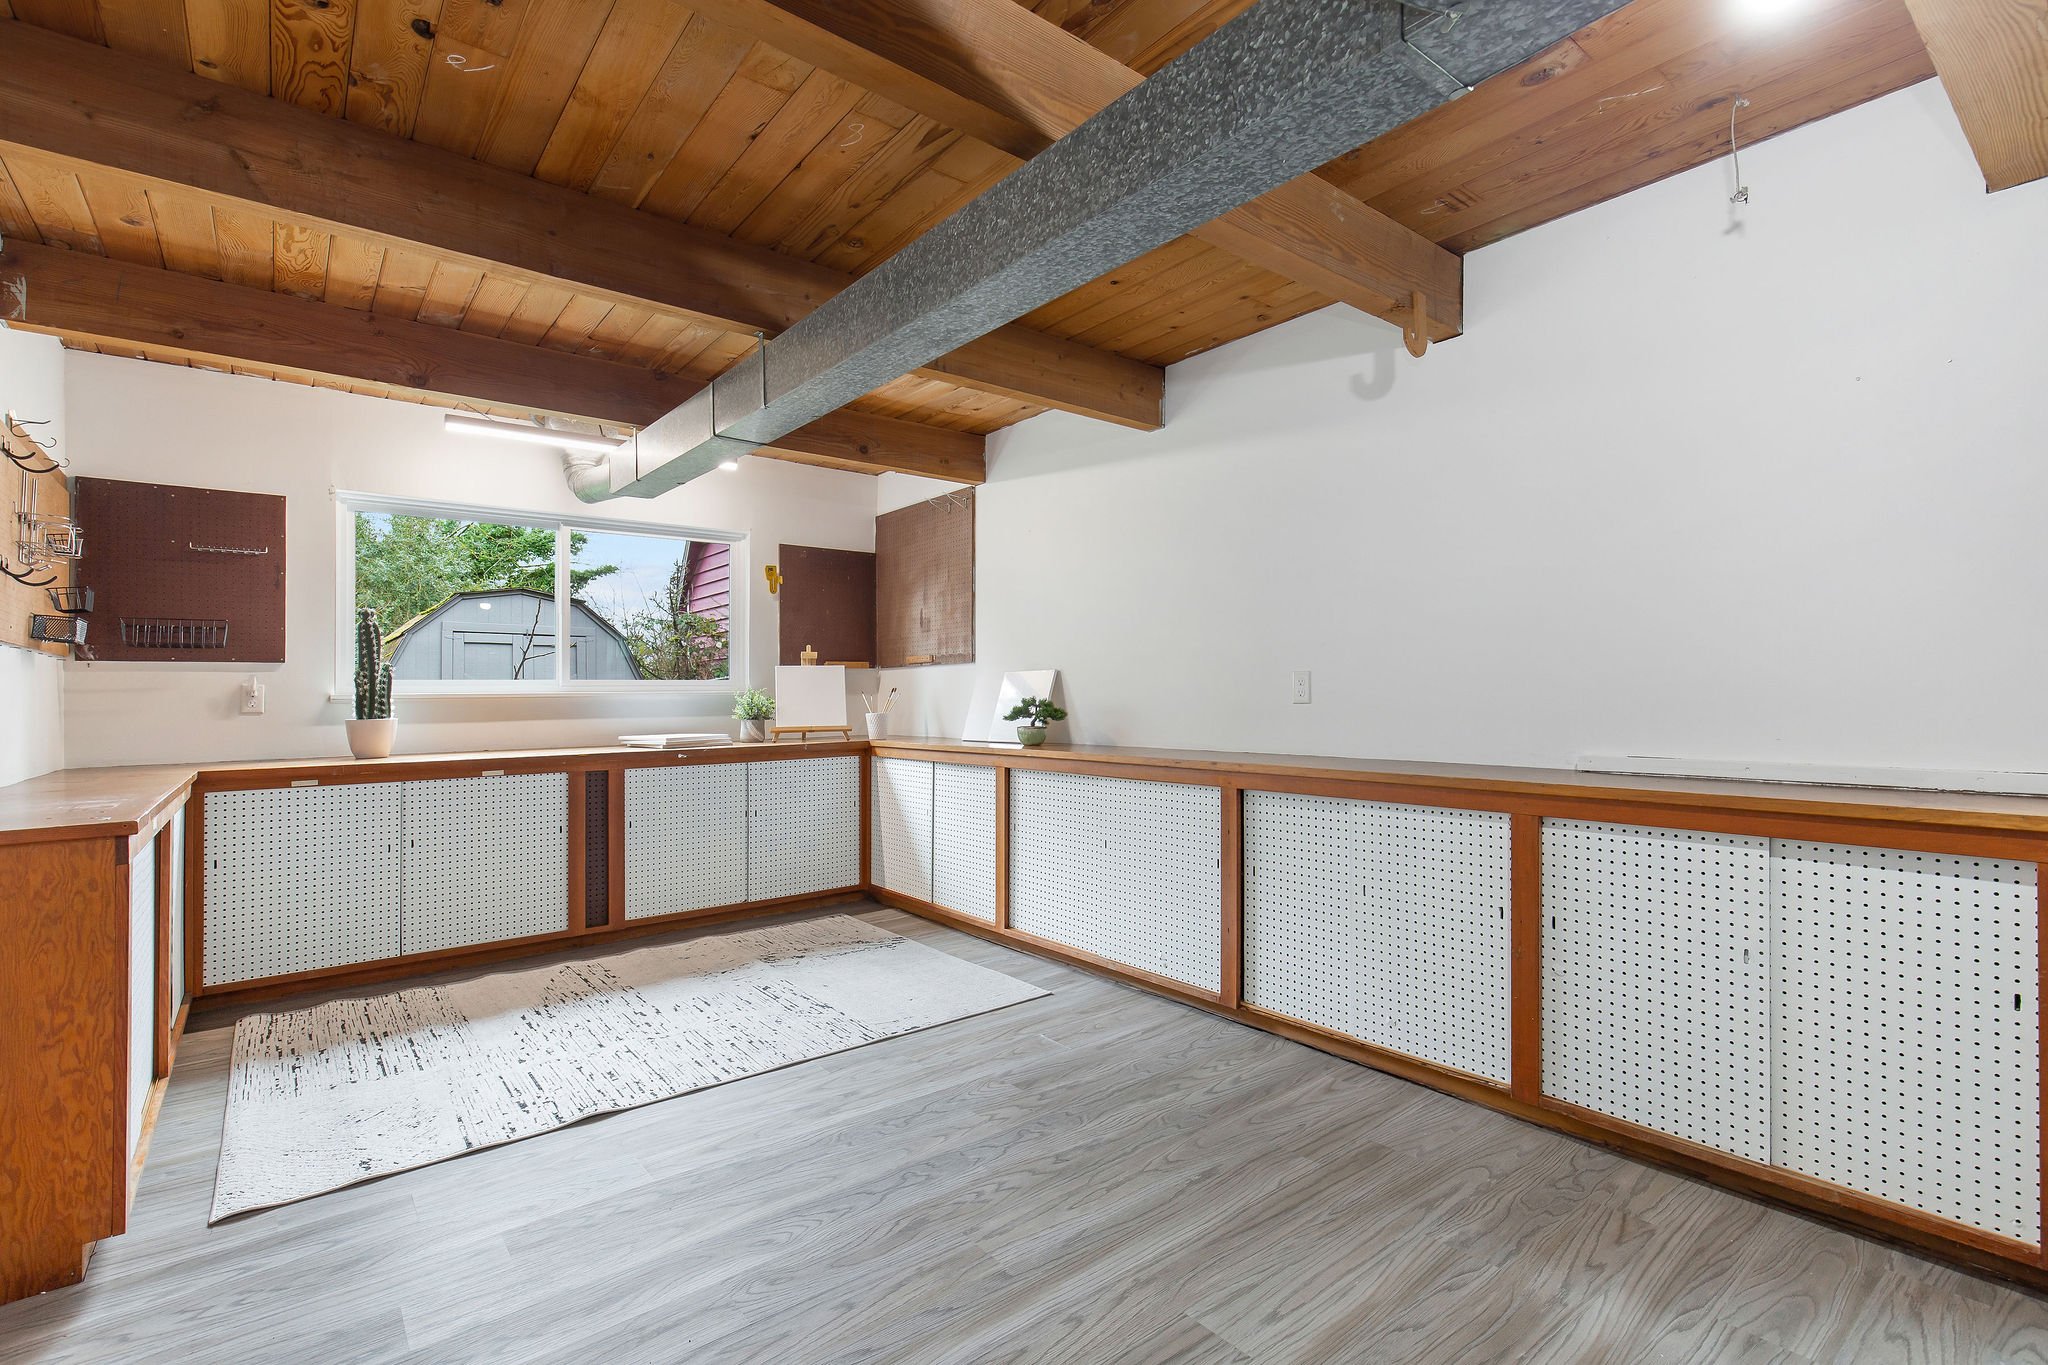  image description: interior of garage with wooden countertops and window 